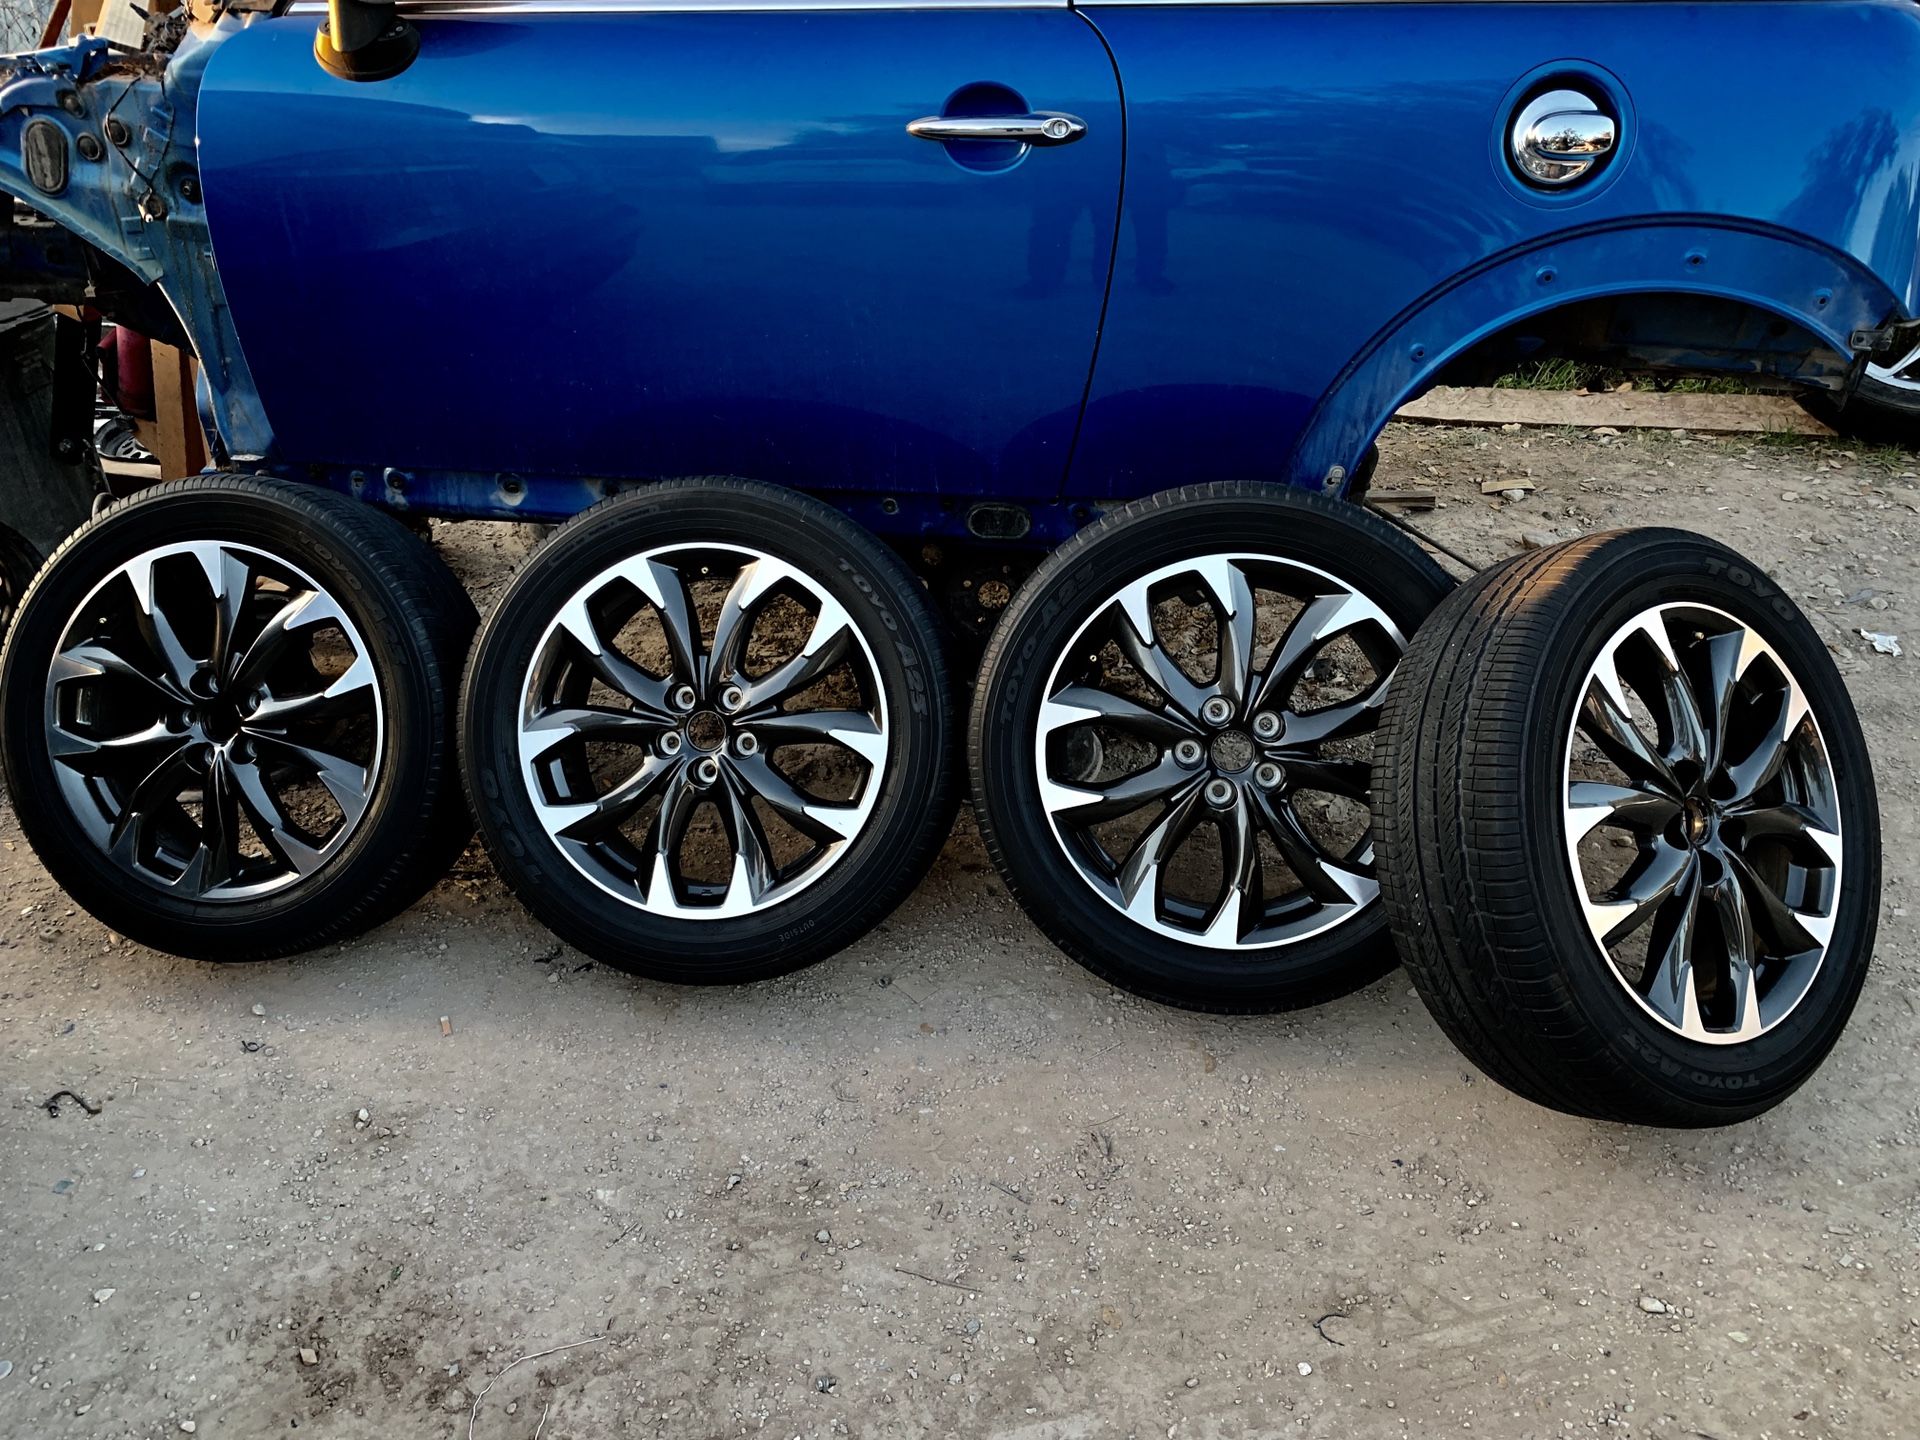 5x114.3 19” wheels new condition